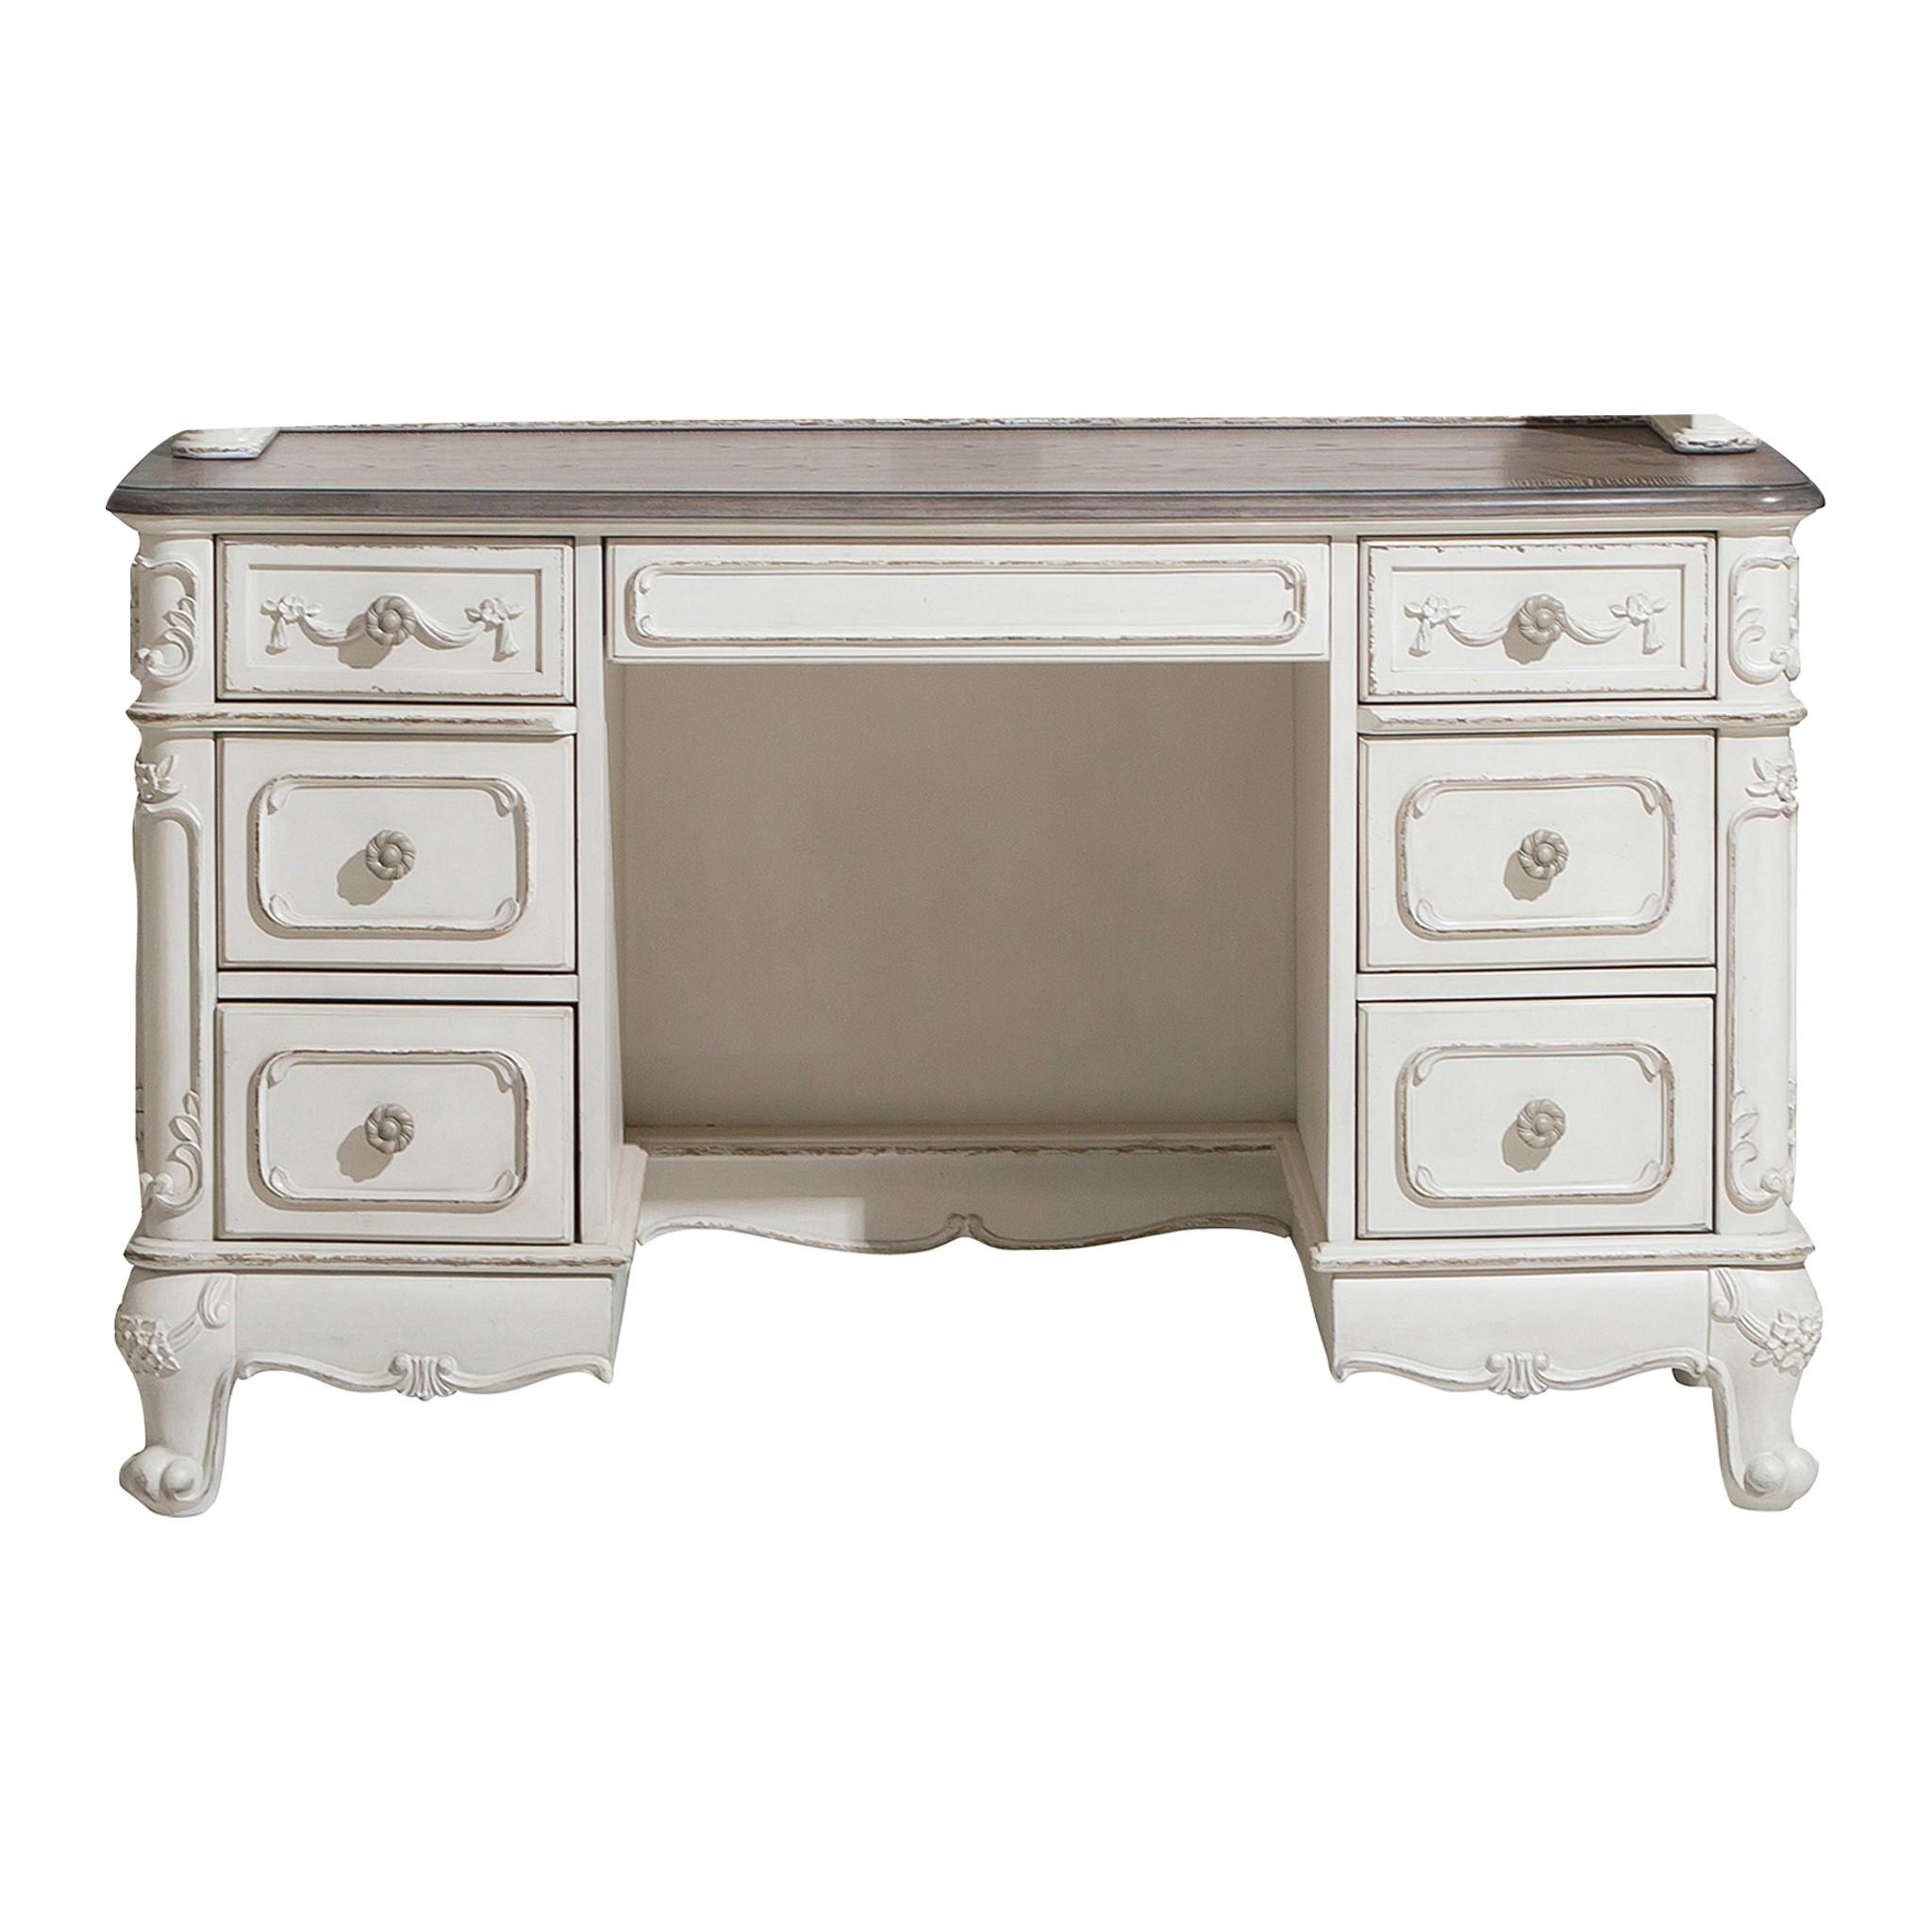 Traditional Writing Desk Cinderella Writing Desk 1386NW-11 1386NW-11 in Oak, Antique White, Gray 